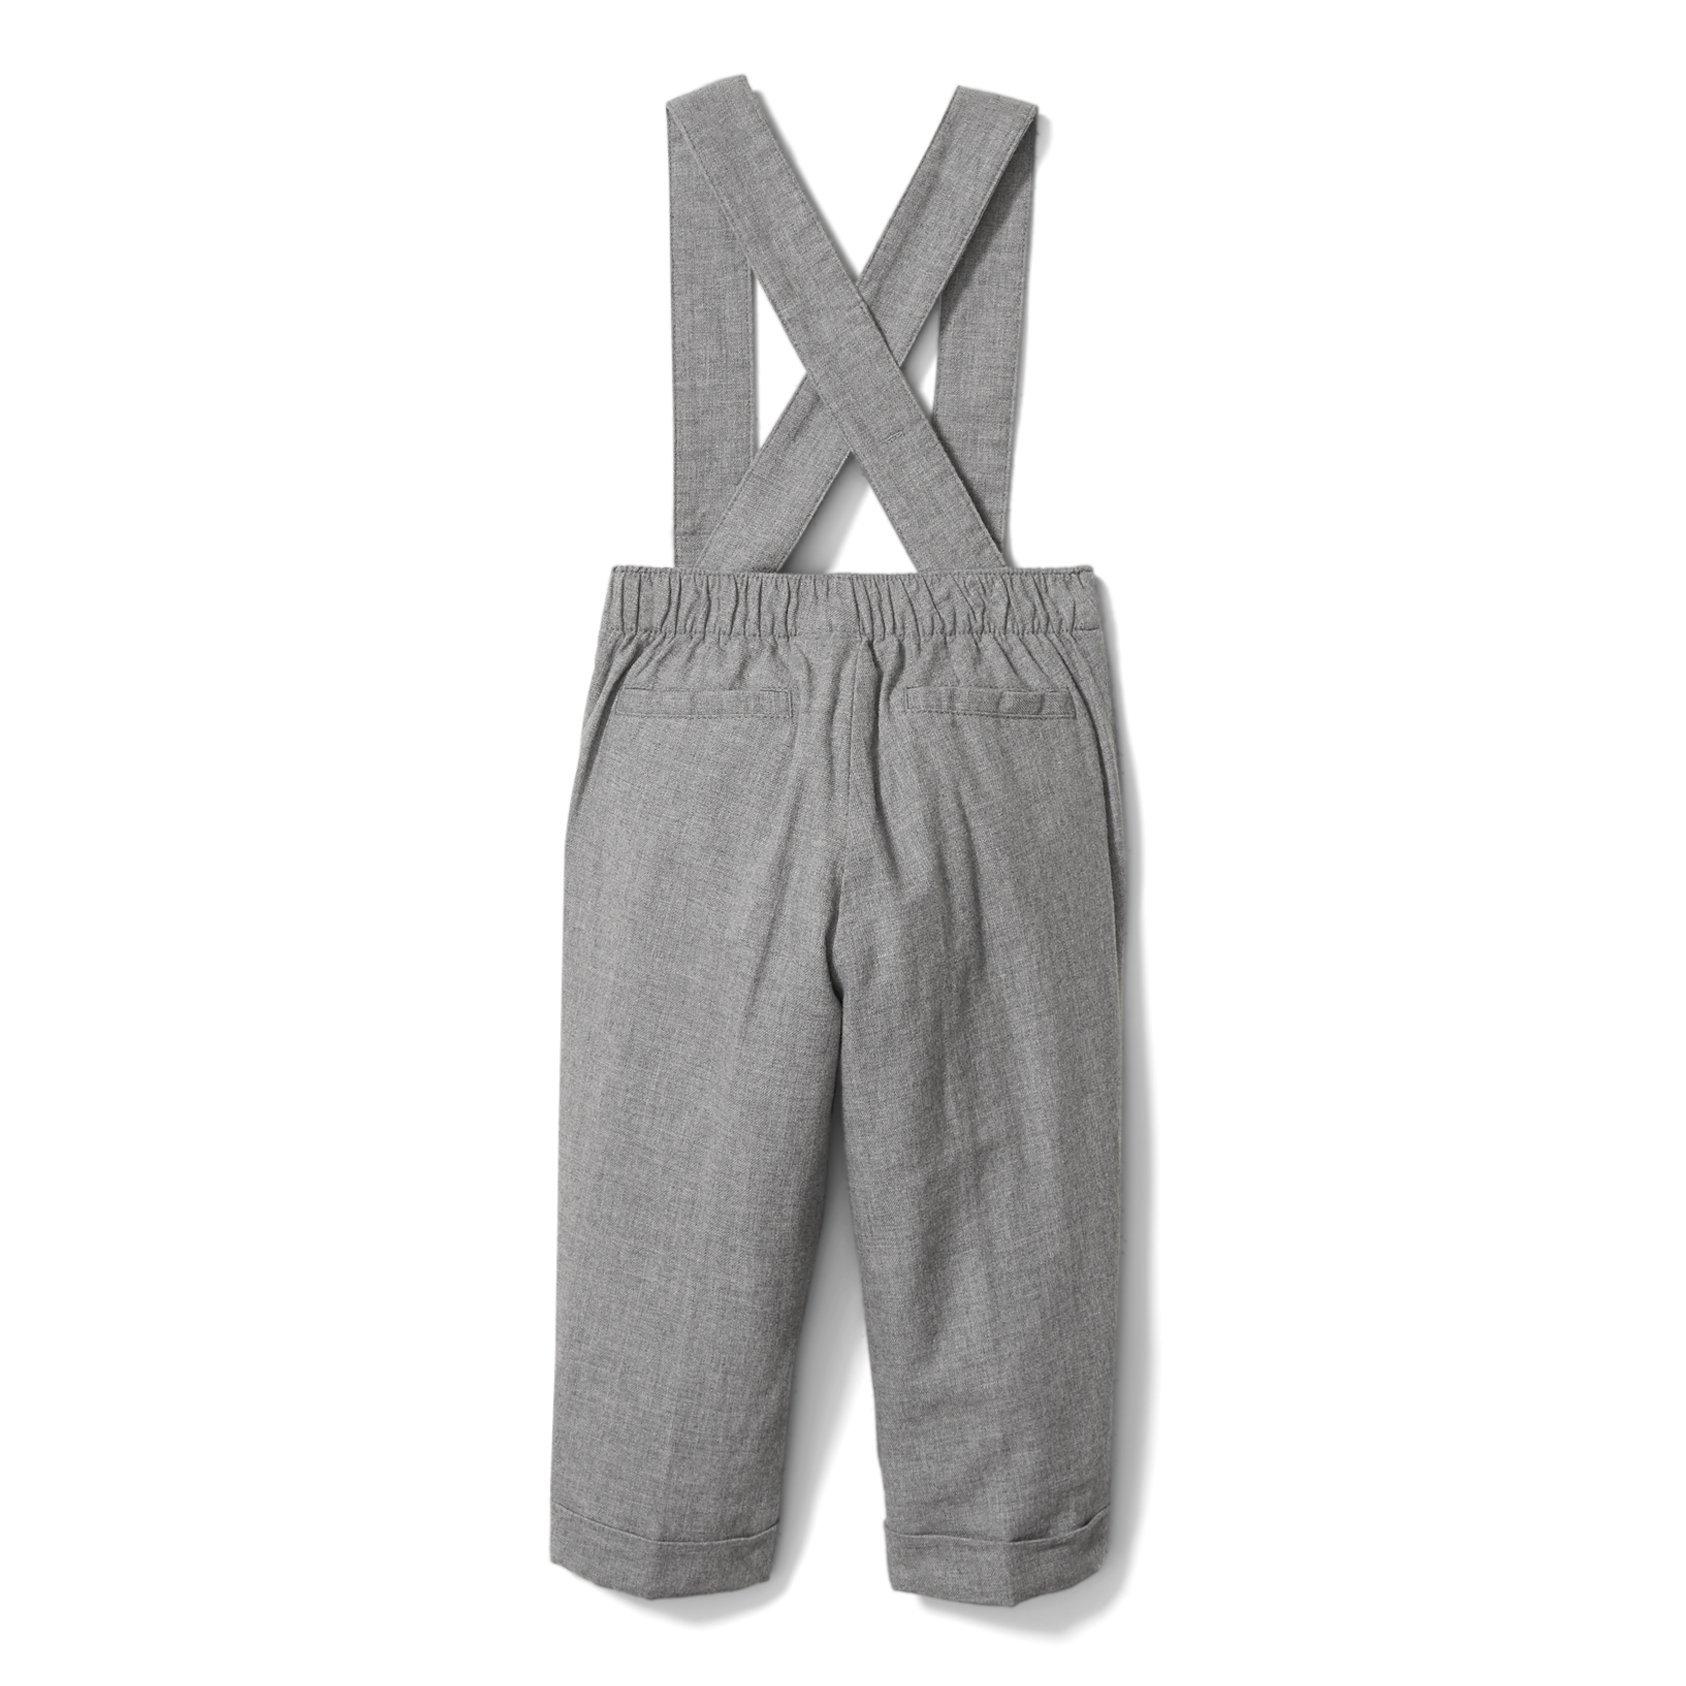 Newborn Dolphin Grey Heather Baby Suspender Pant by Janie and Jack